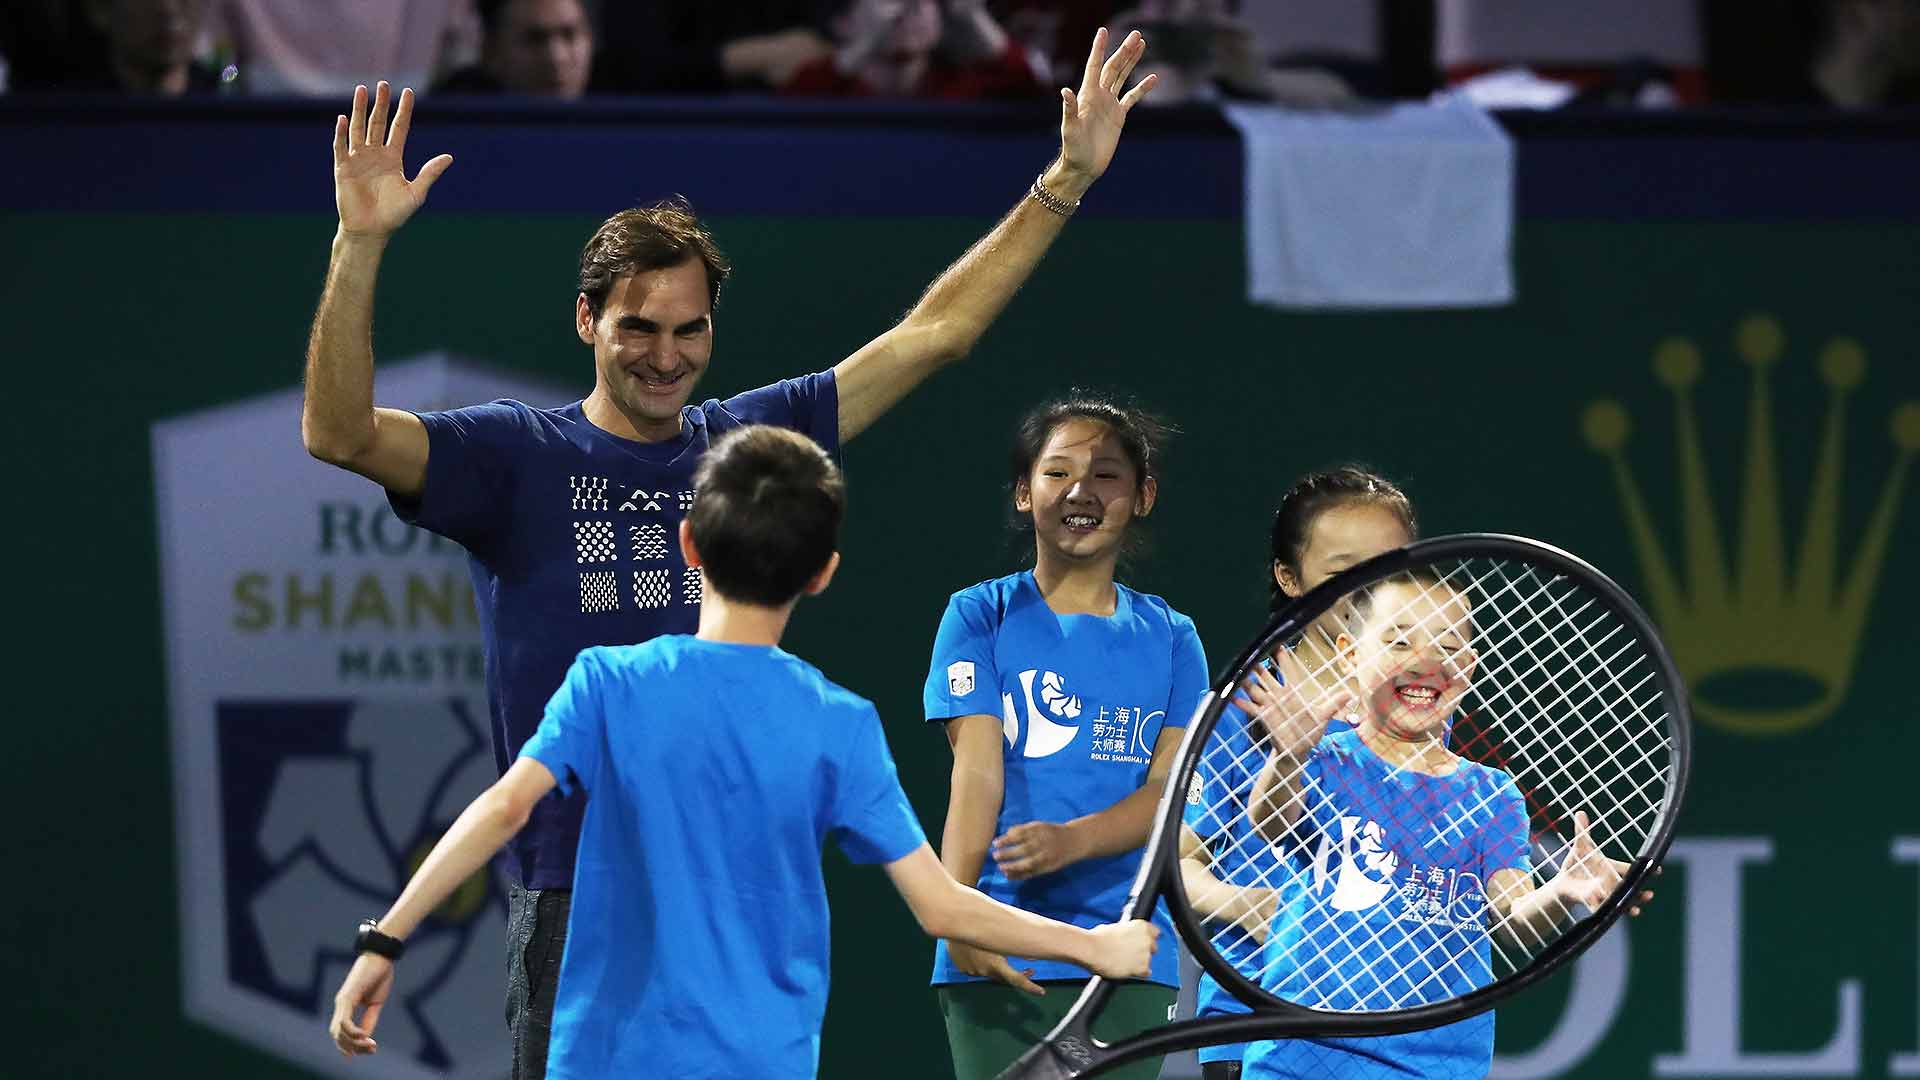 Roger Federer will be celebrated as an Icon Athlete at the 2023 Rolex Shanghai Masters.